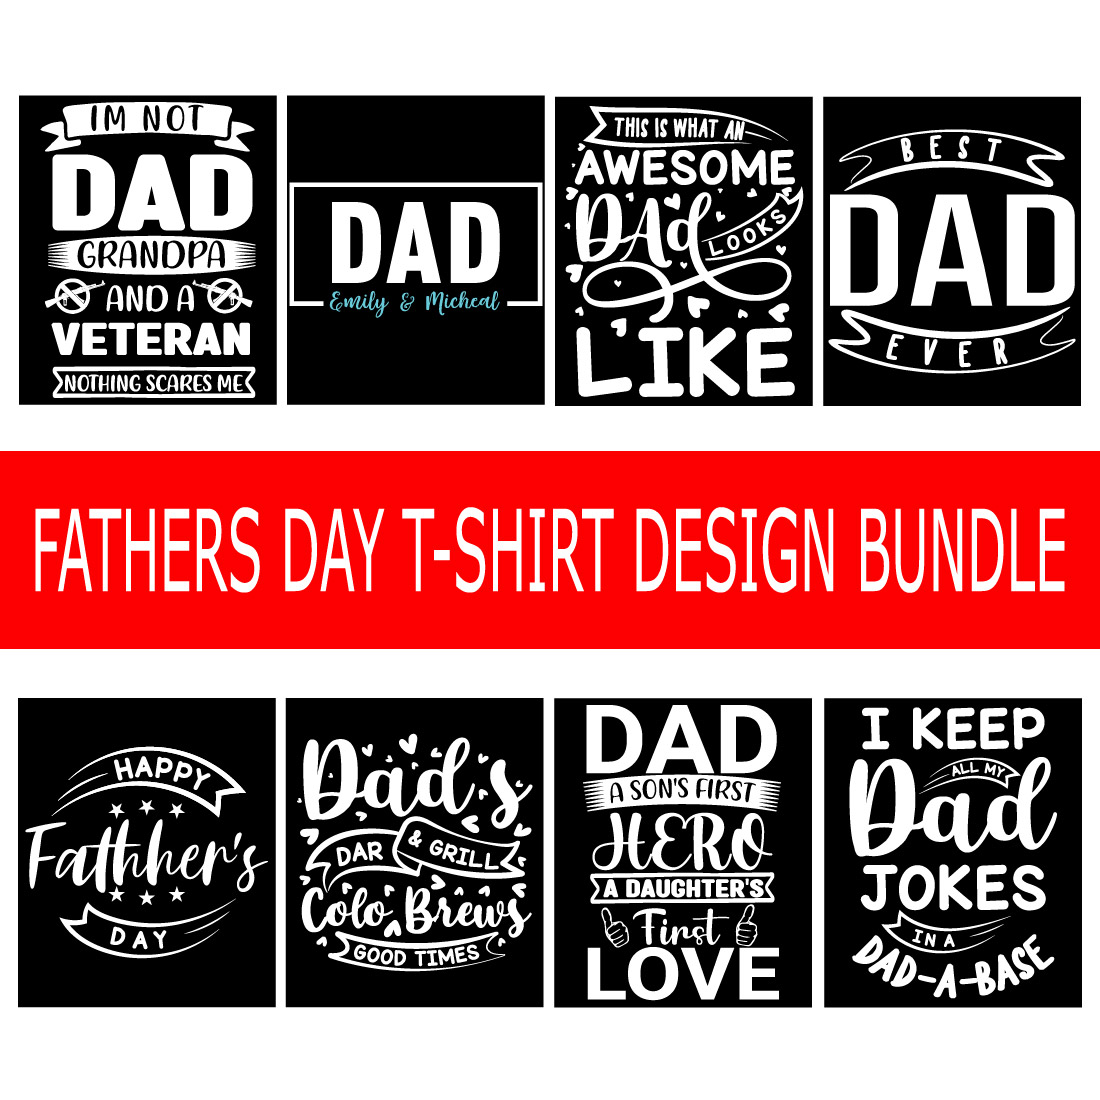 Father’s Day T-Shirt Design Bundle free svg preview image.